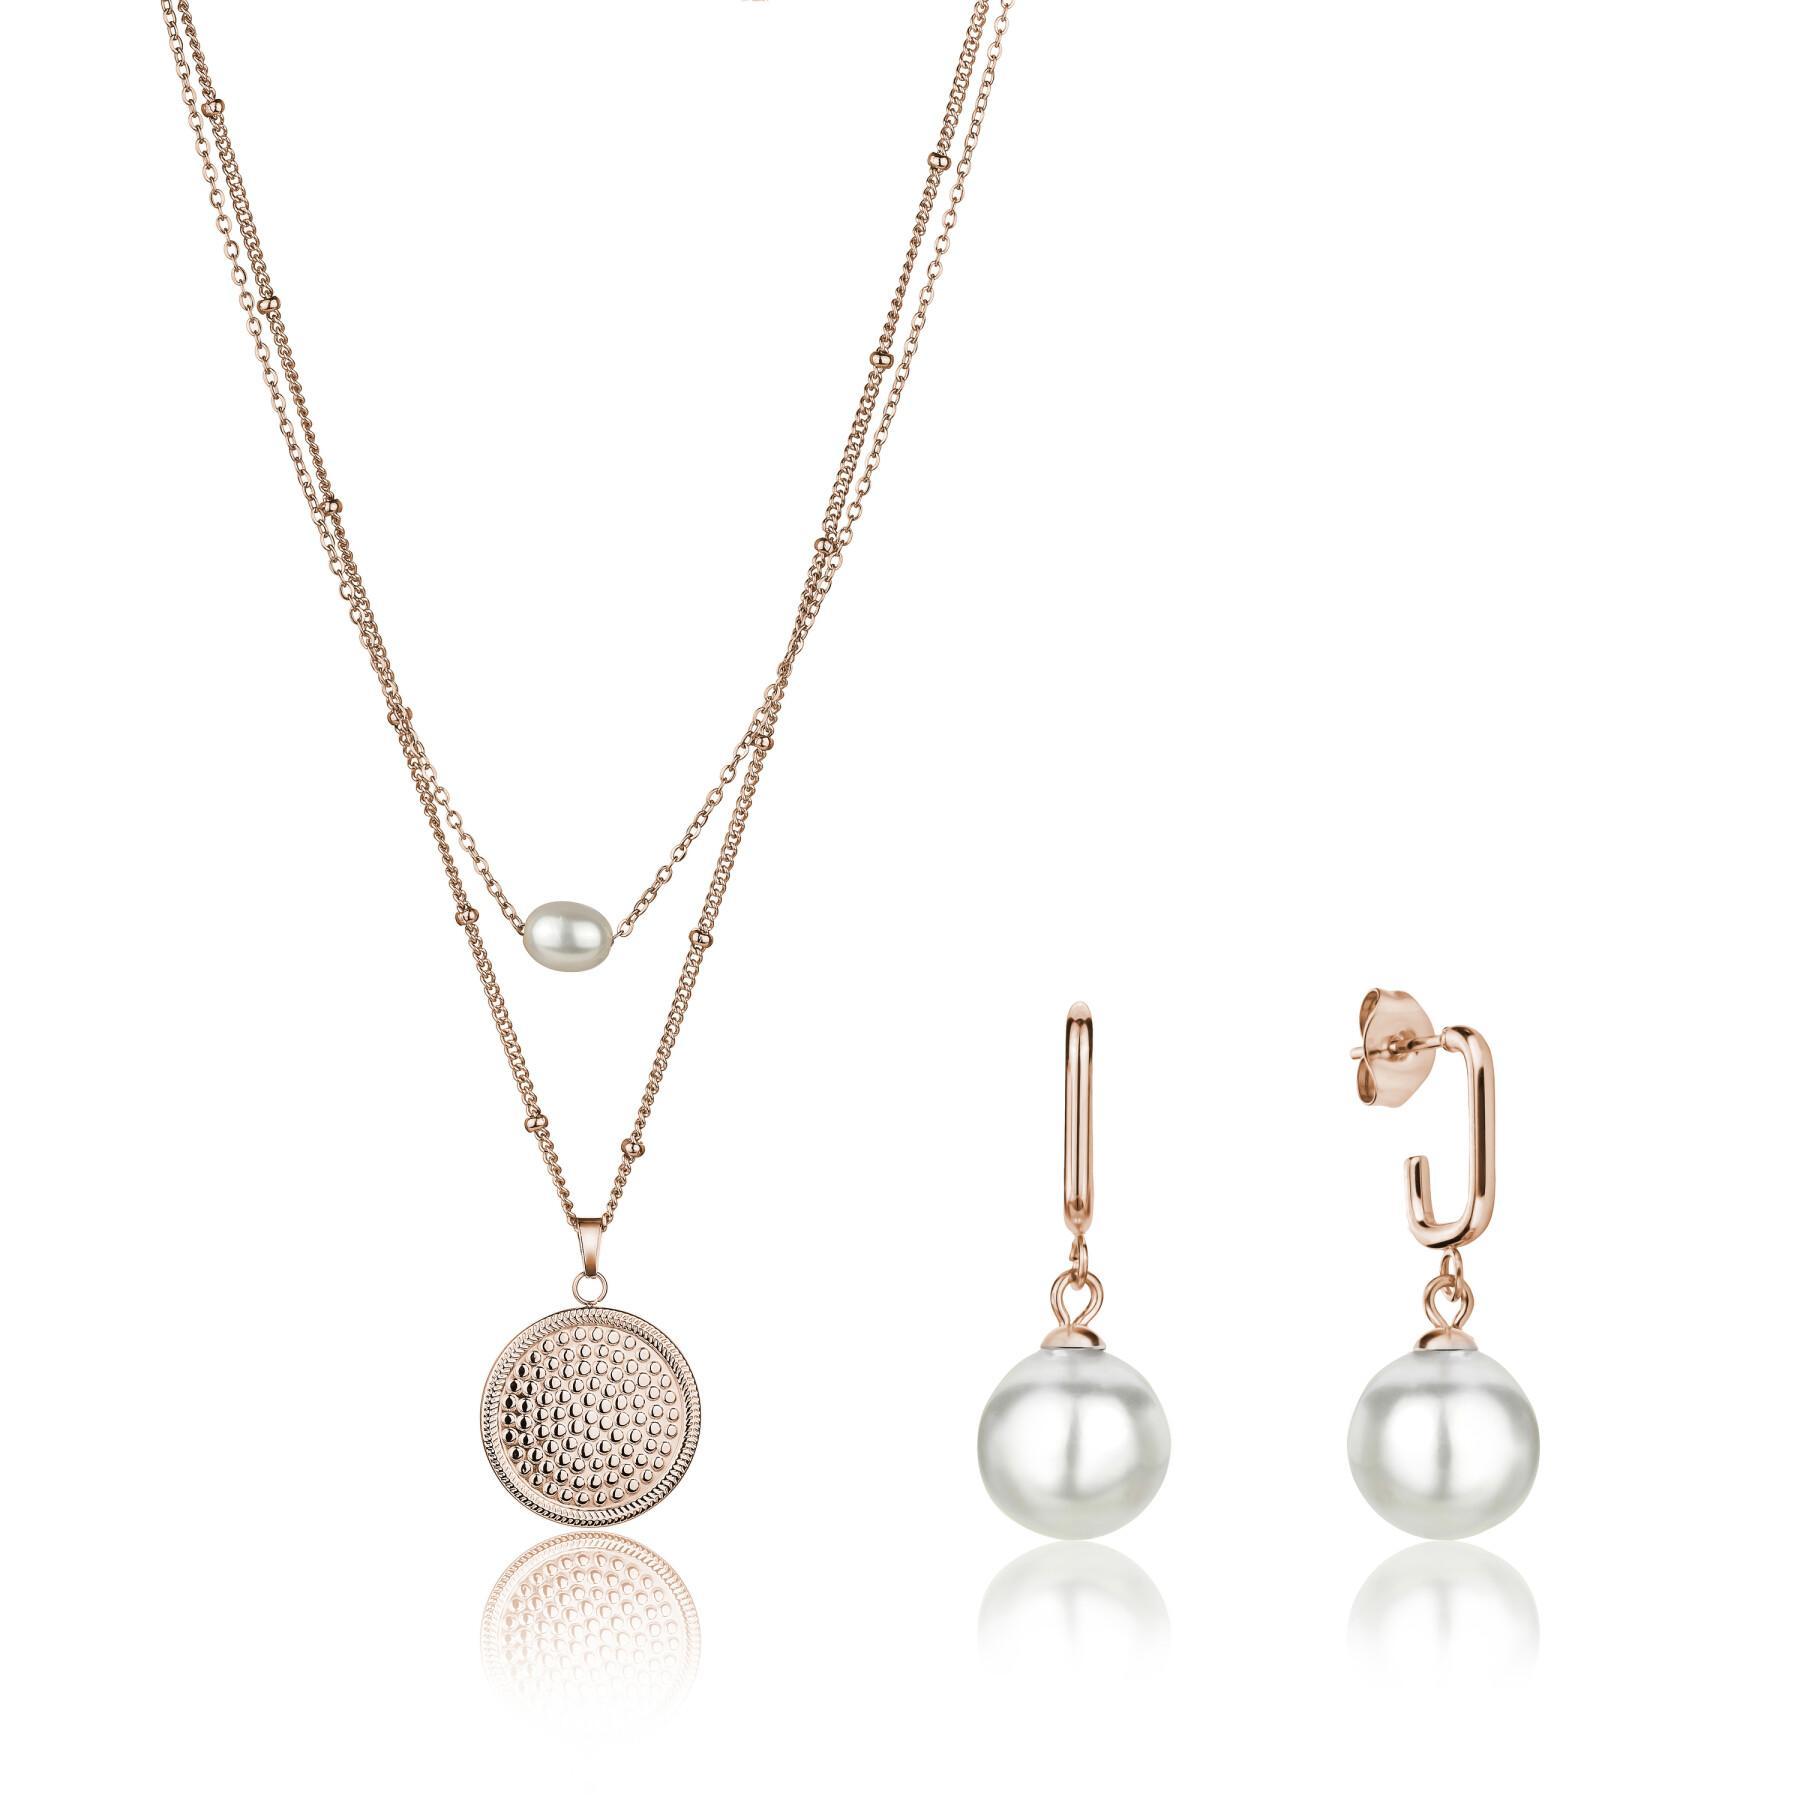 Necklace, bracelet and earrings set Isabella Ford June Pearl